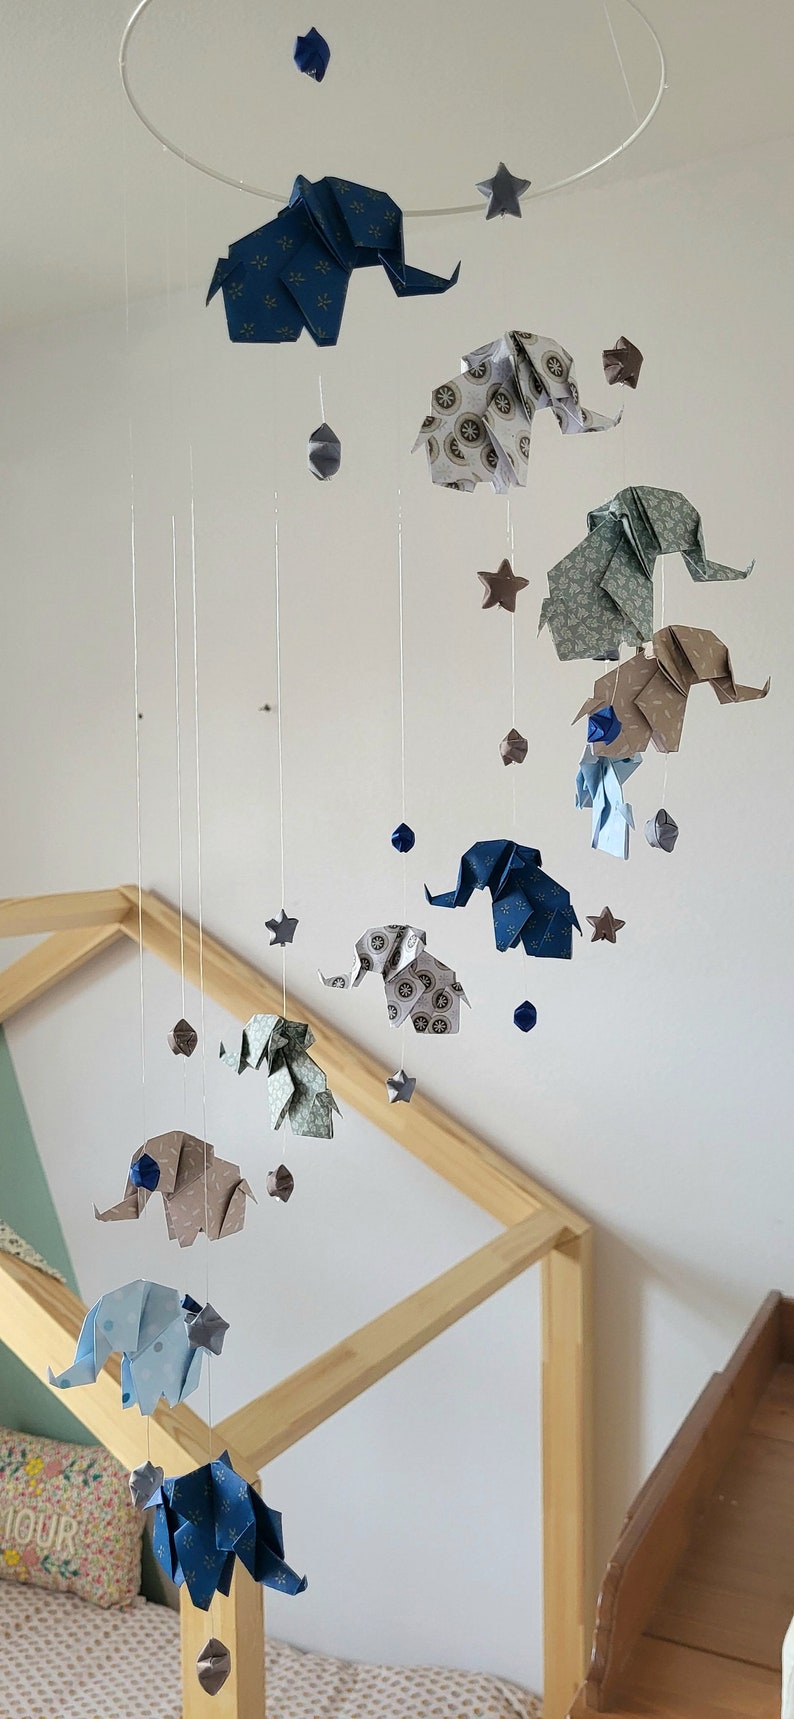 Origami baby mobile Elephants and stars, navy blue, gray, taupe, white image 5